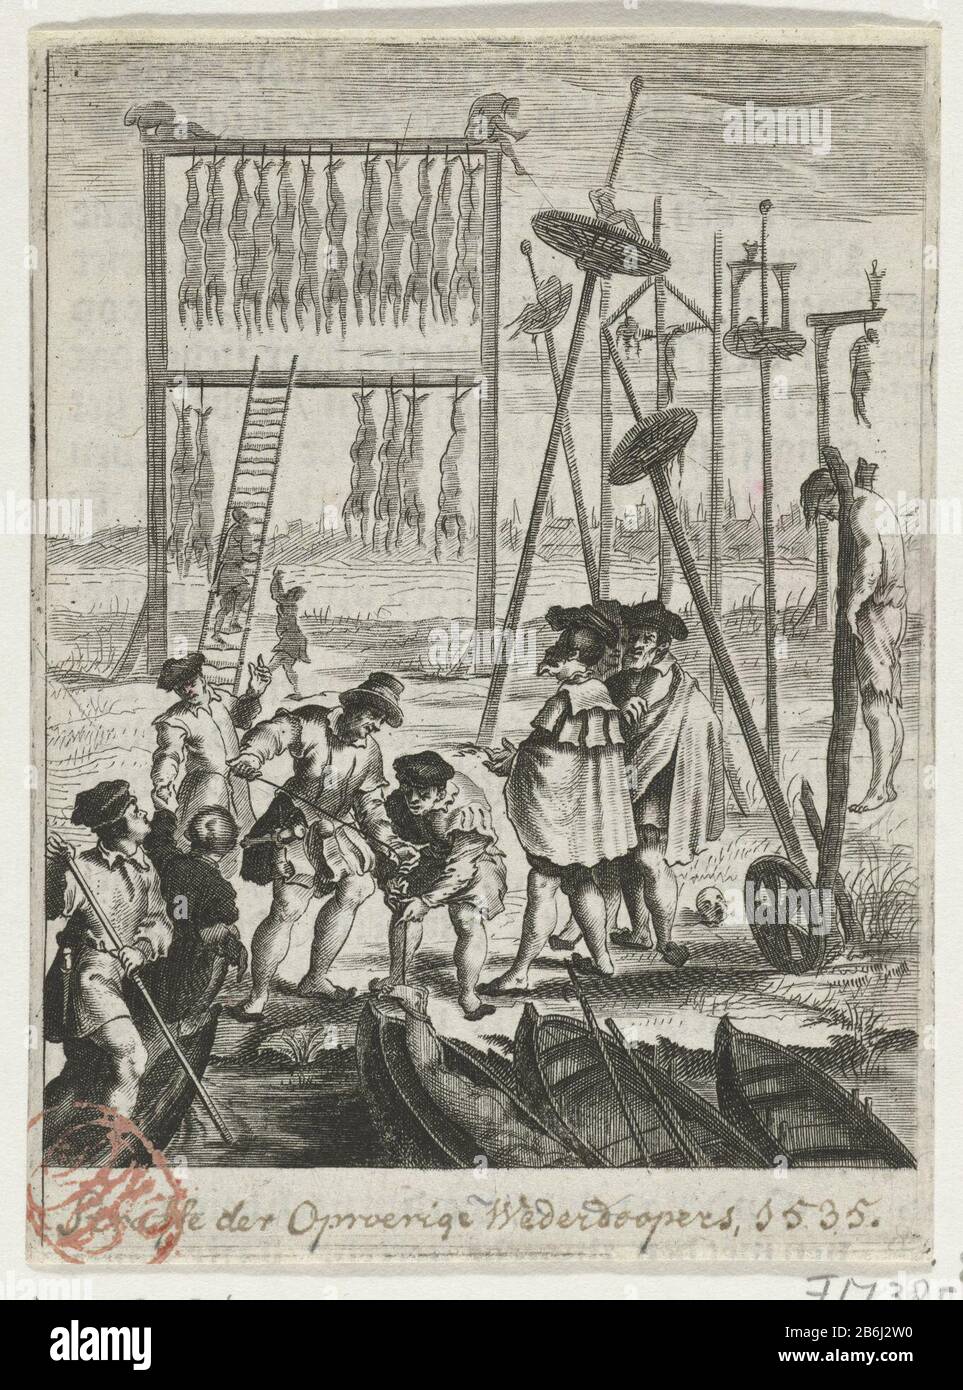 The bodies of the Anabaptists on the gallows, 1535 The bodies of the Anabaptists be hung on gallows at the gallows Volewijk, 1535. Without the poem. Print out the book cut with text verso. Manufacturer : printmaker: anonymous to print by: anonymous to painting: Barend DirckszPlaats manufacture: Northern Netherlands Date: 1657 - 1659 Physical features: etching and engra material: paper Technique: etching / engra (printing process) Dimensions: plate edge: h 107 mm × b 80 for mmToelichtingIllustratie: L. Hortensius, D. The book Lamberti Hortensii (...). Van den der riot re-baptism down, J.J. Schi Stock Photo